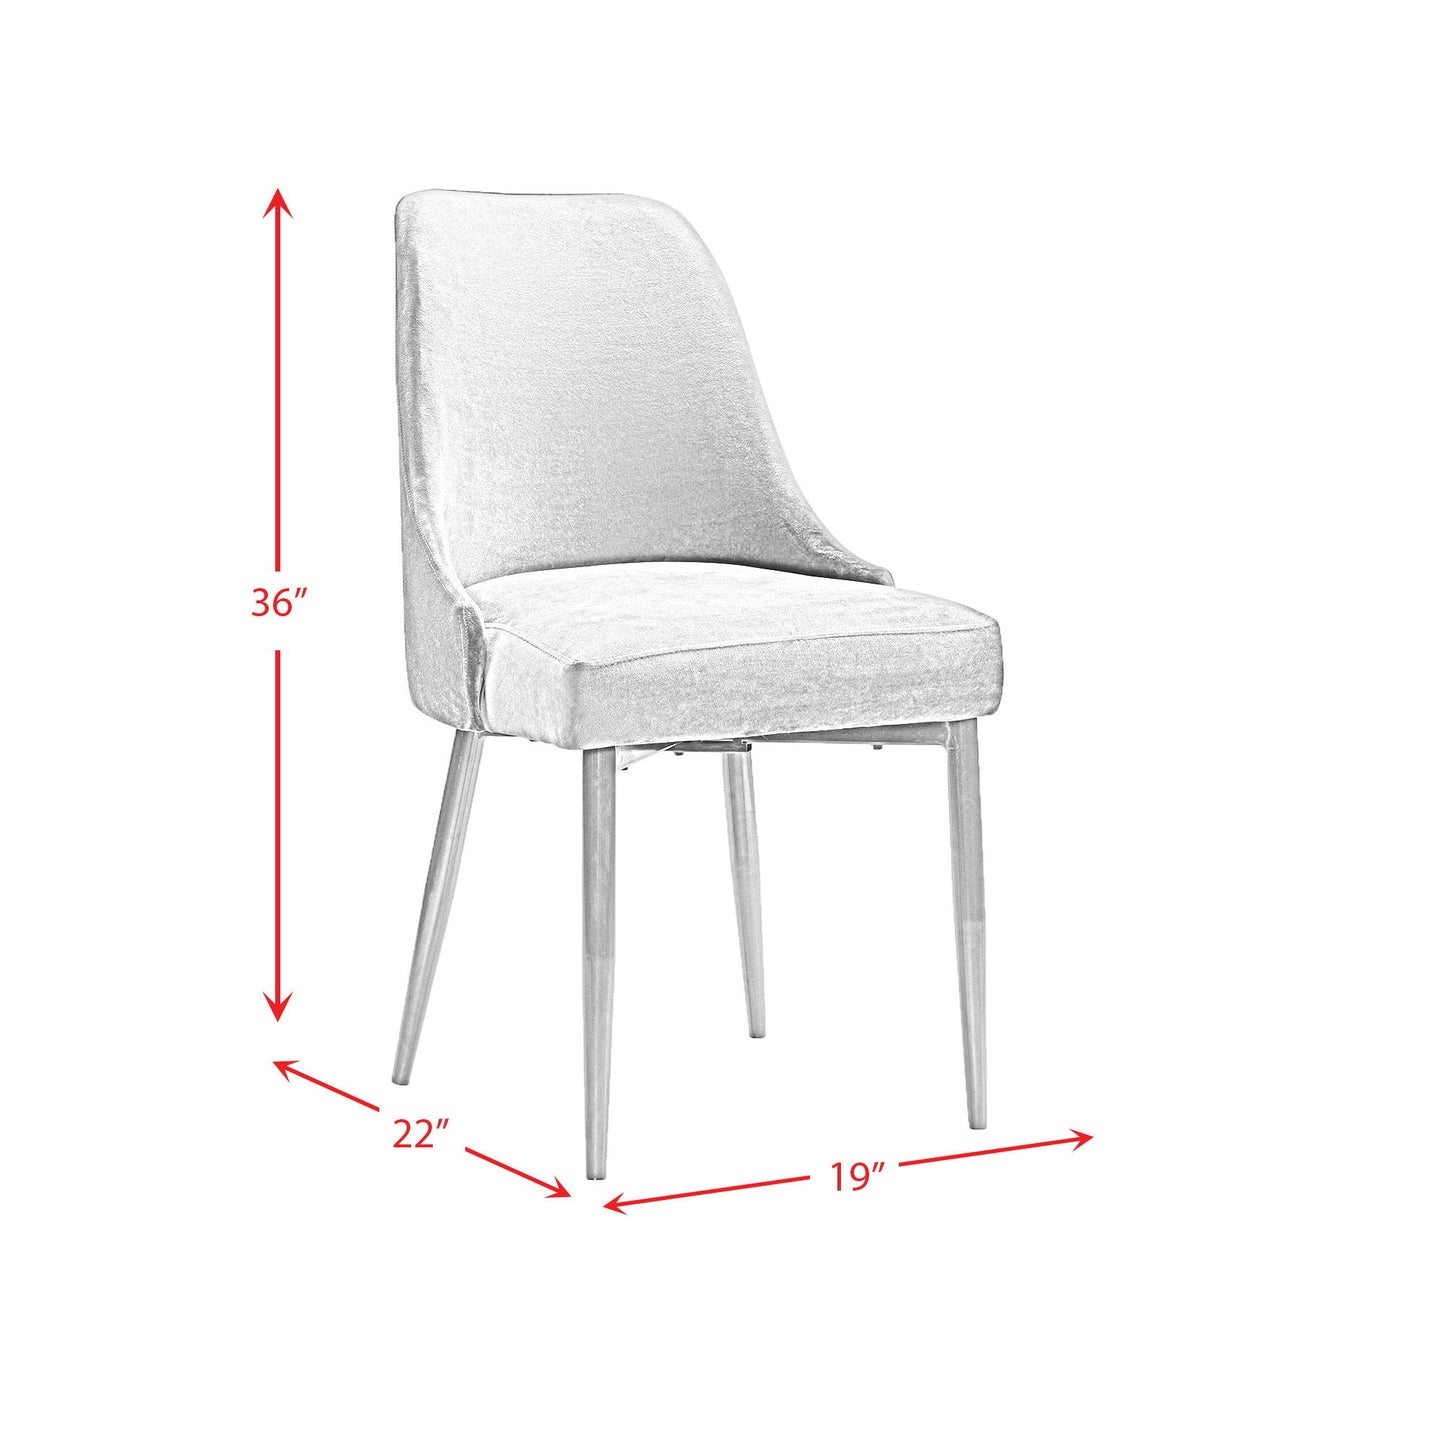 Celeste - Dining Side Chair With Cream Fabric (Set of 2)